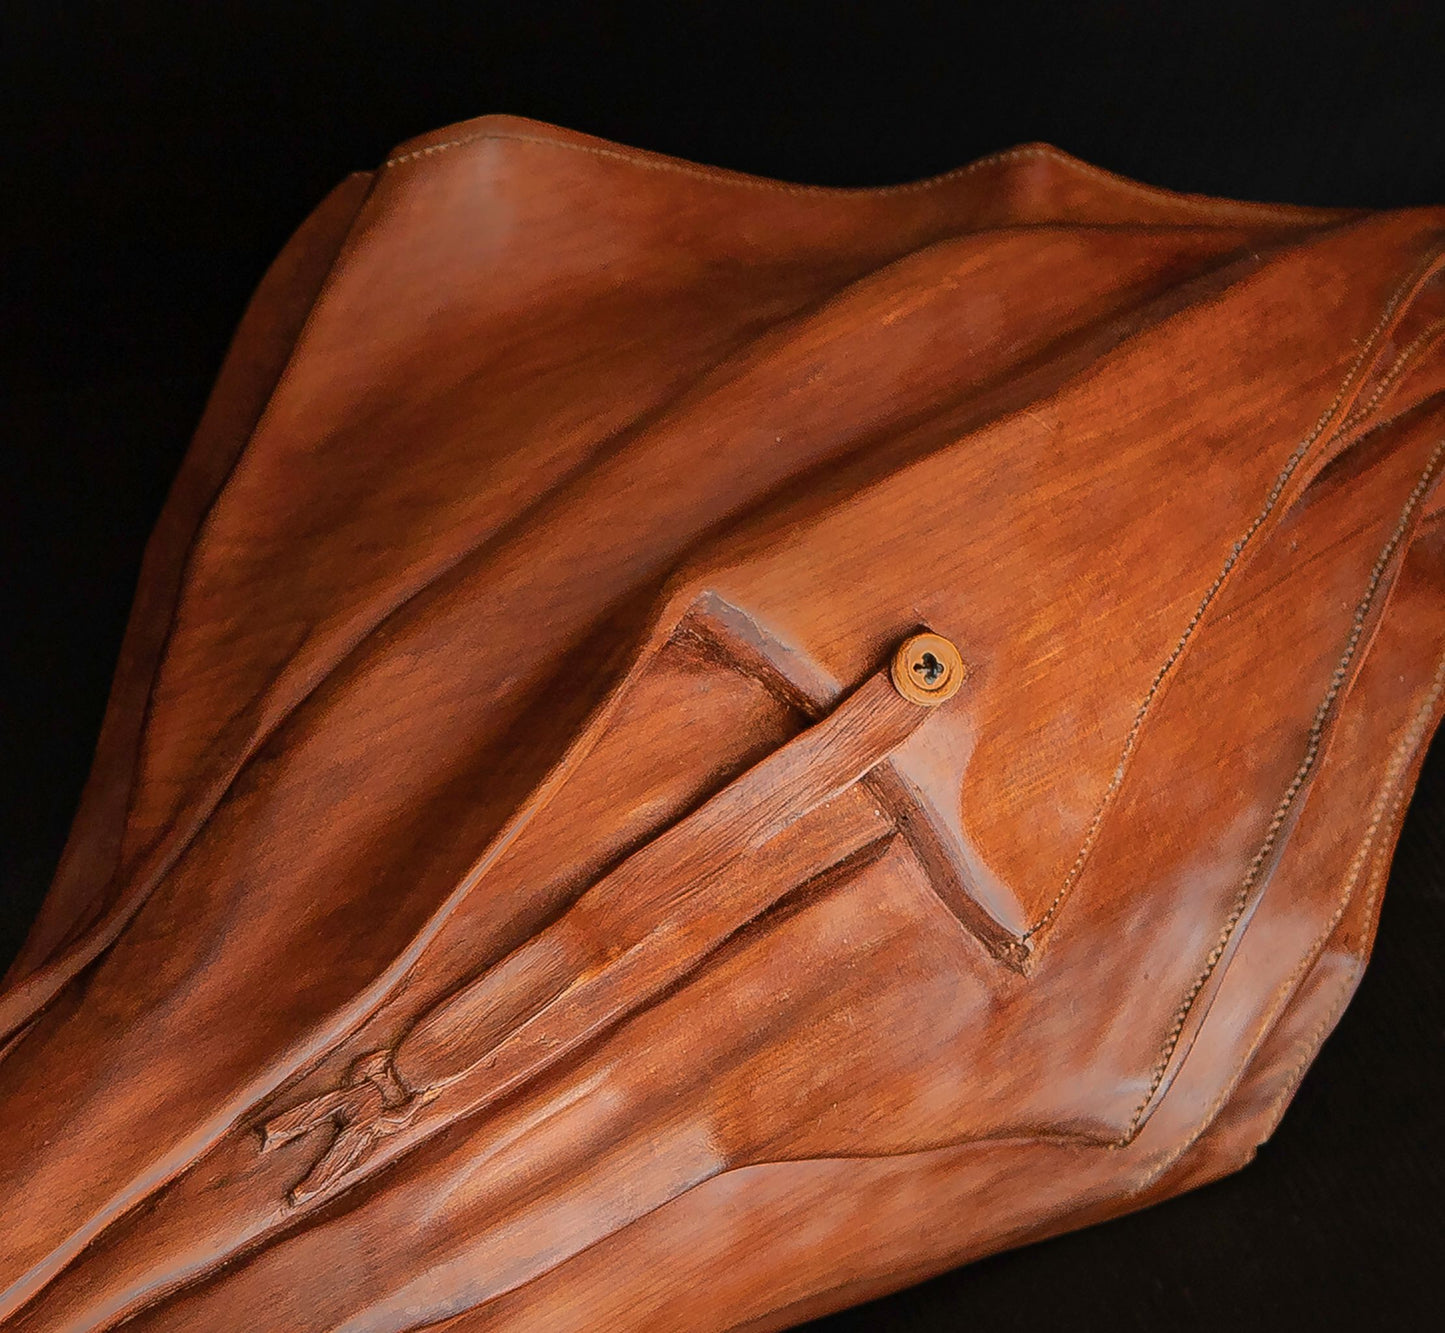 Hand Carved Wooden Umbrella Detail by Kevin McCardell Silver Fern Gallery